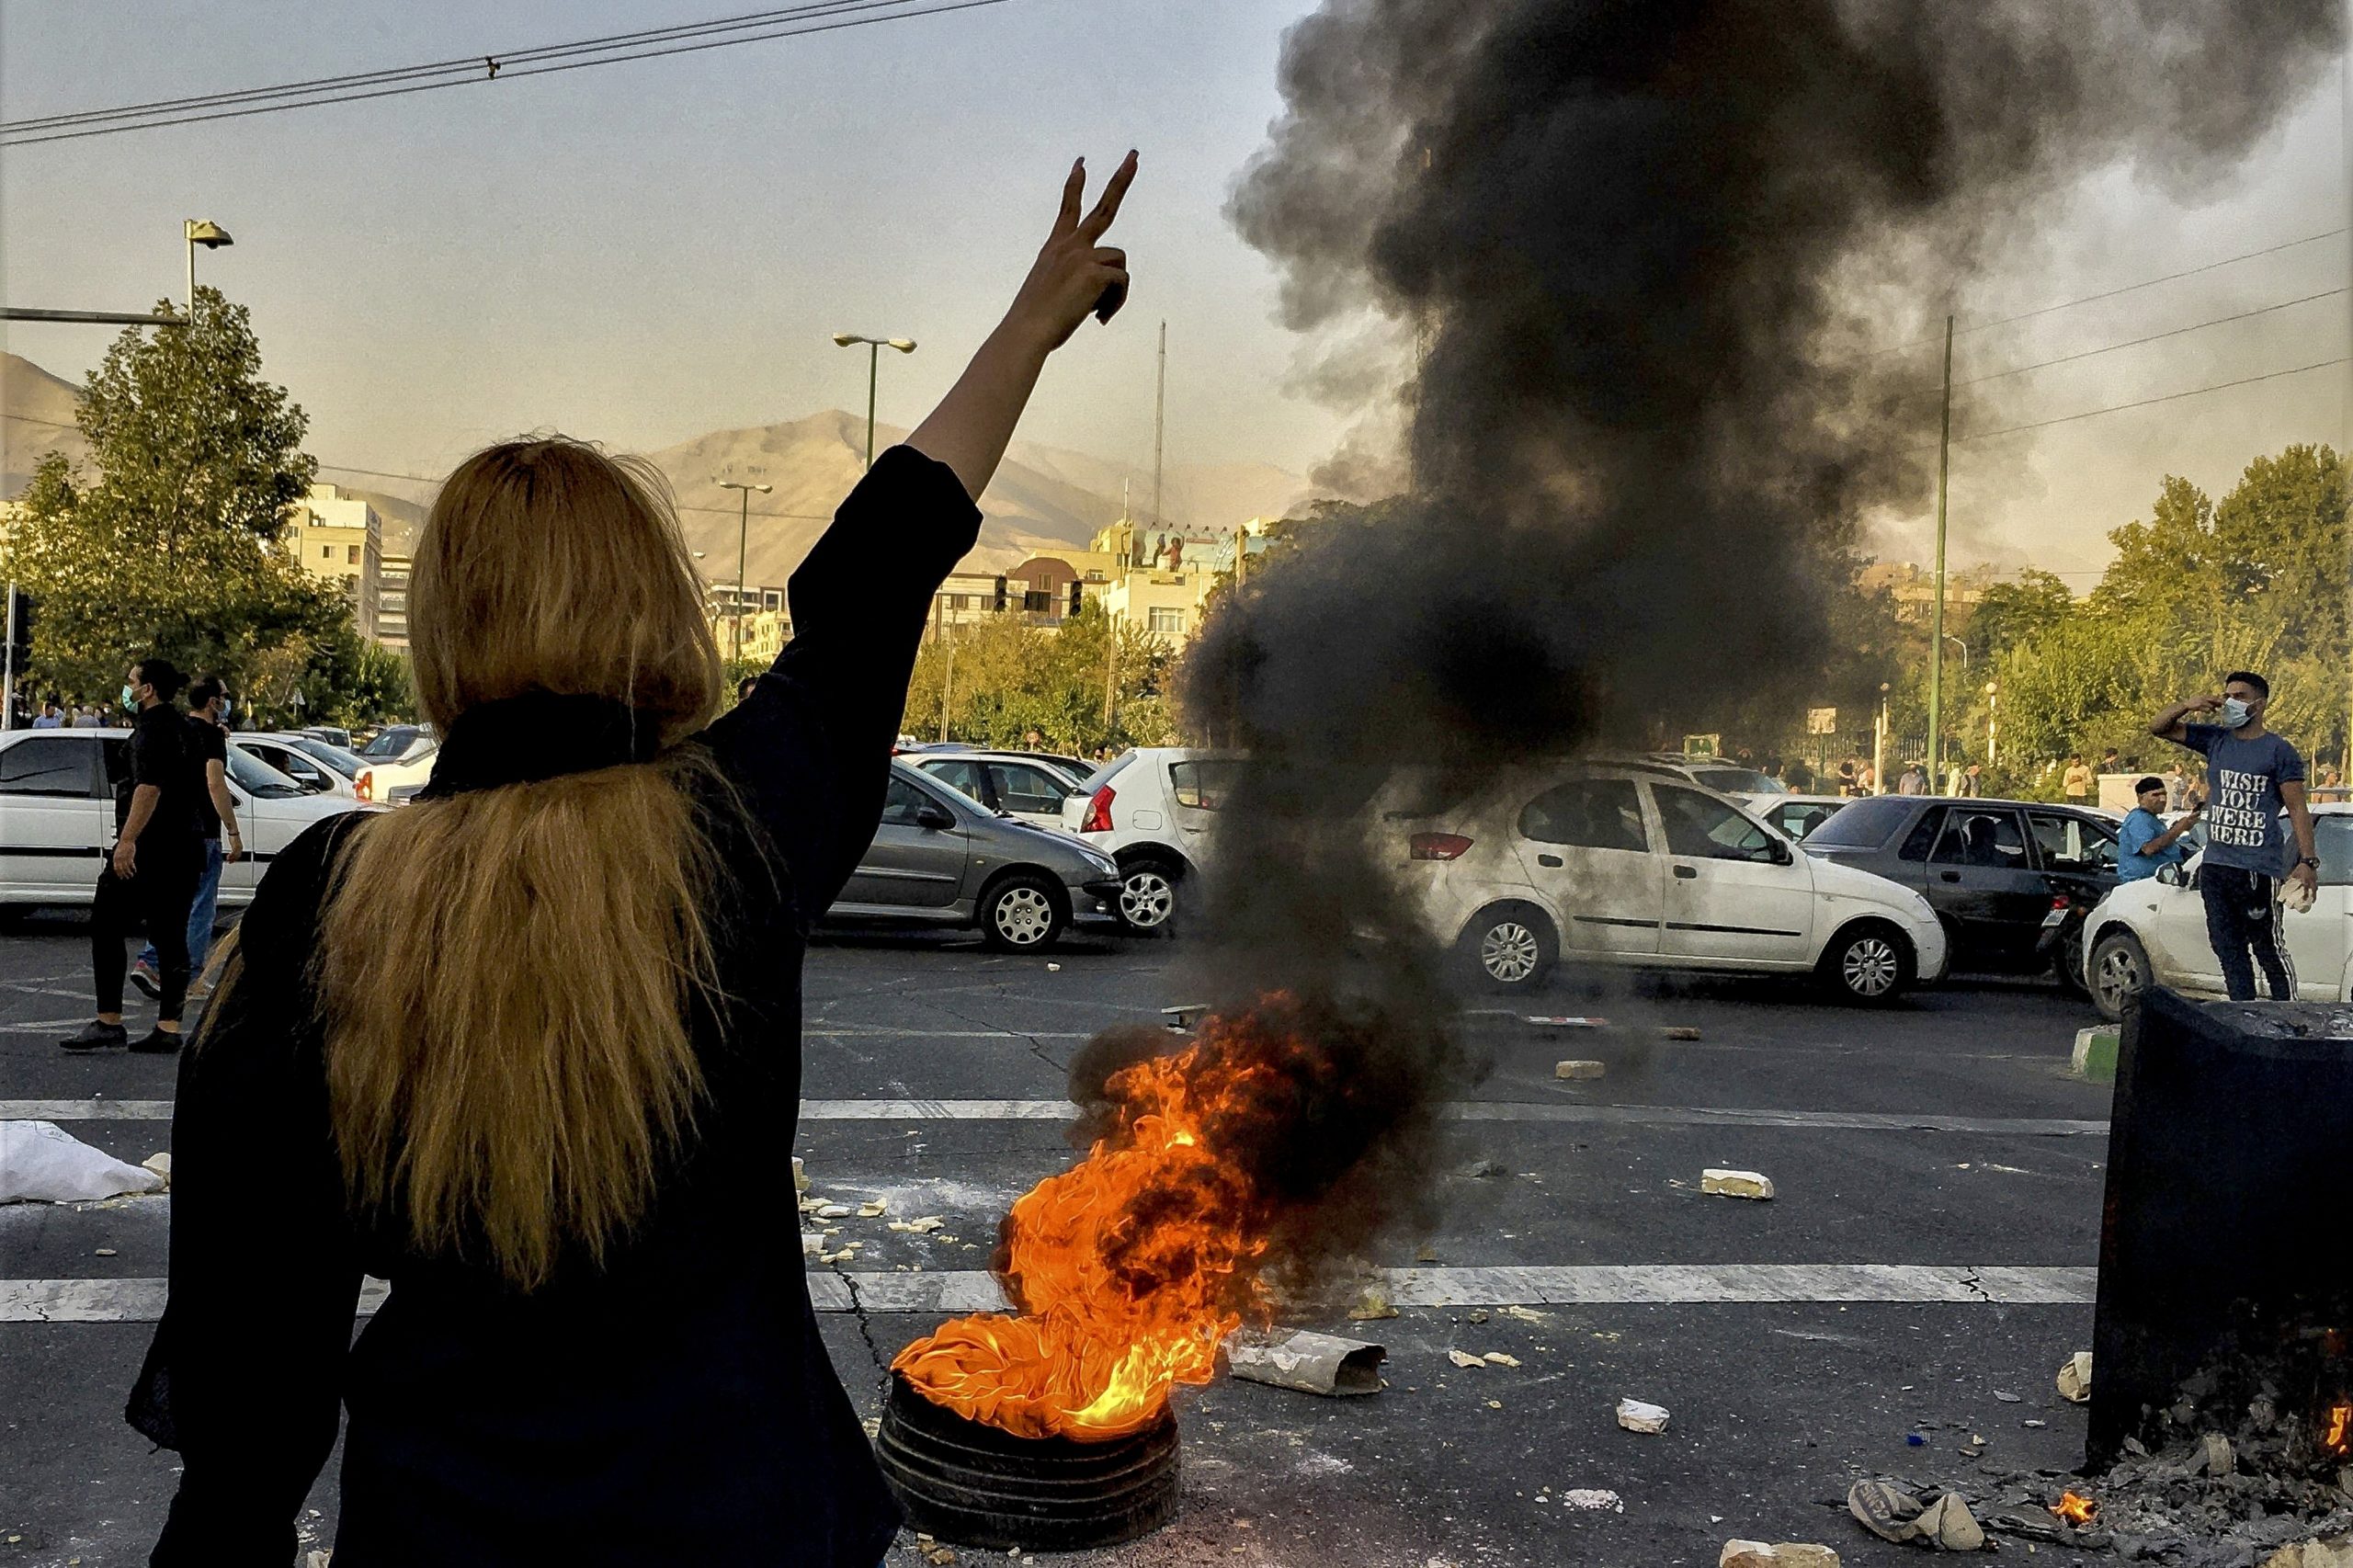 Standing to the left, a woman with her back facing the camera holds up a peace sign. In front of her, a fire blazes in the middle of the road